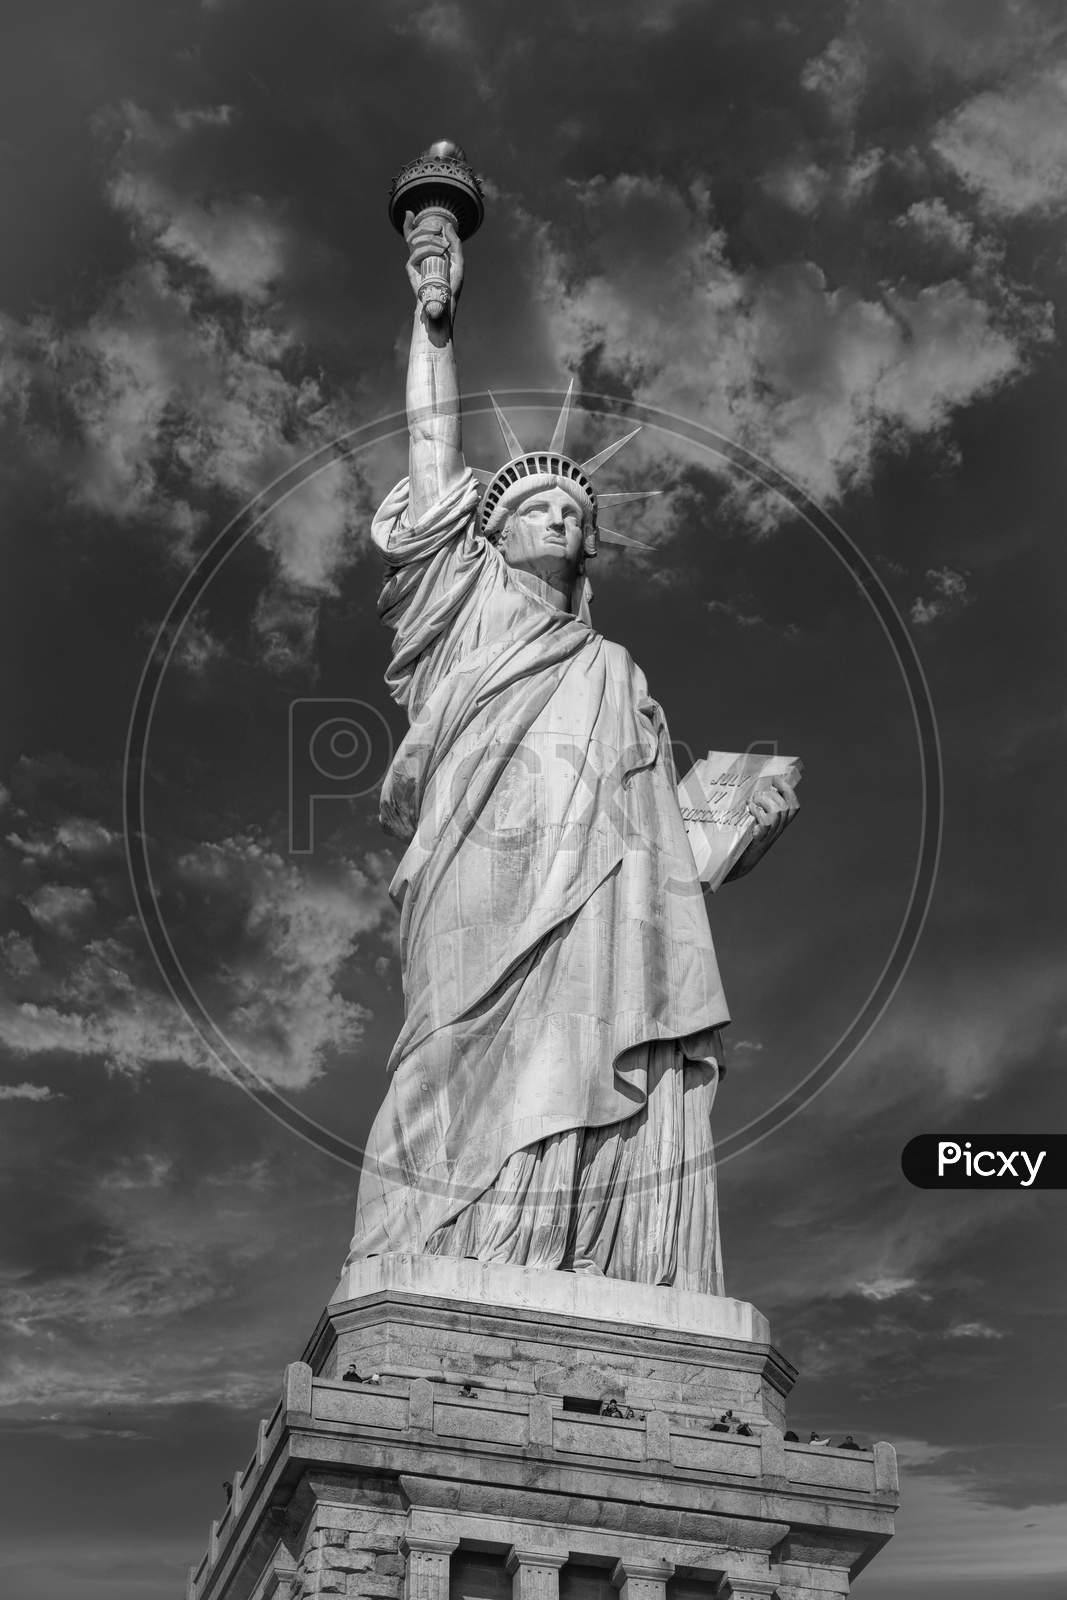 The Statue of Liberty in New York City USA daylight close up low angle view in black and white